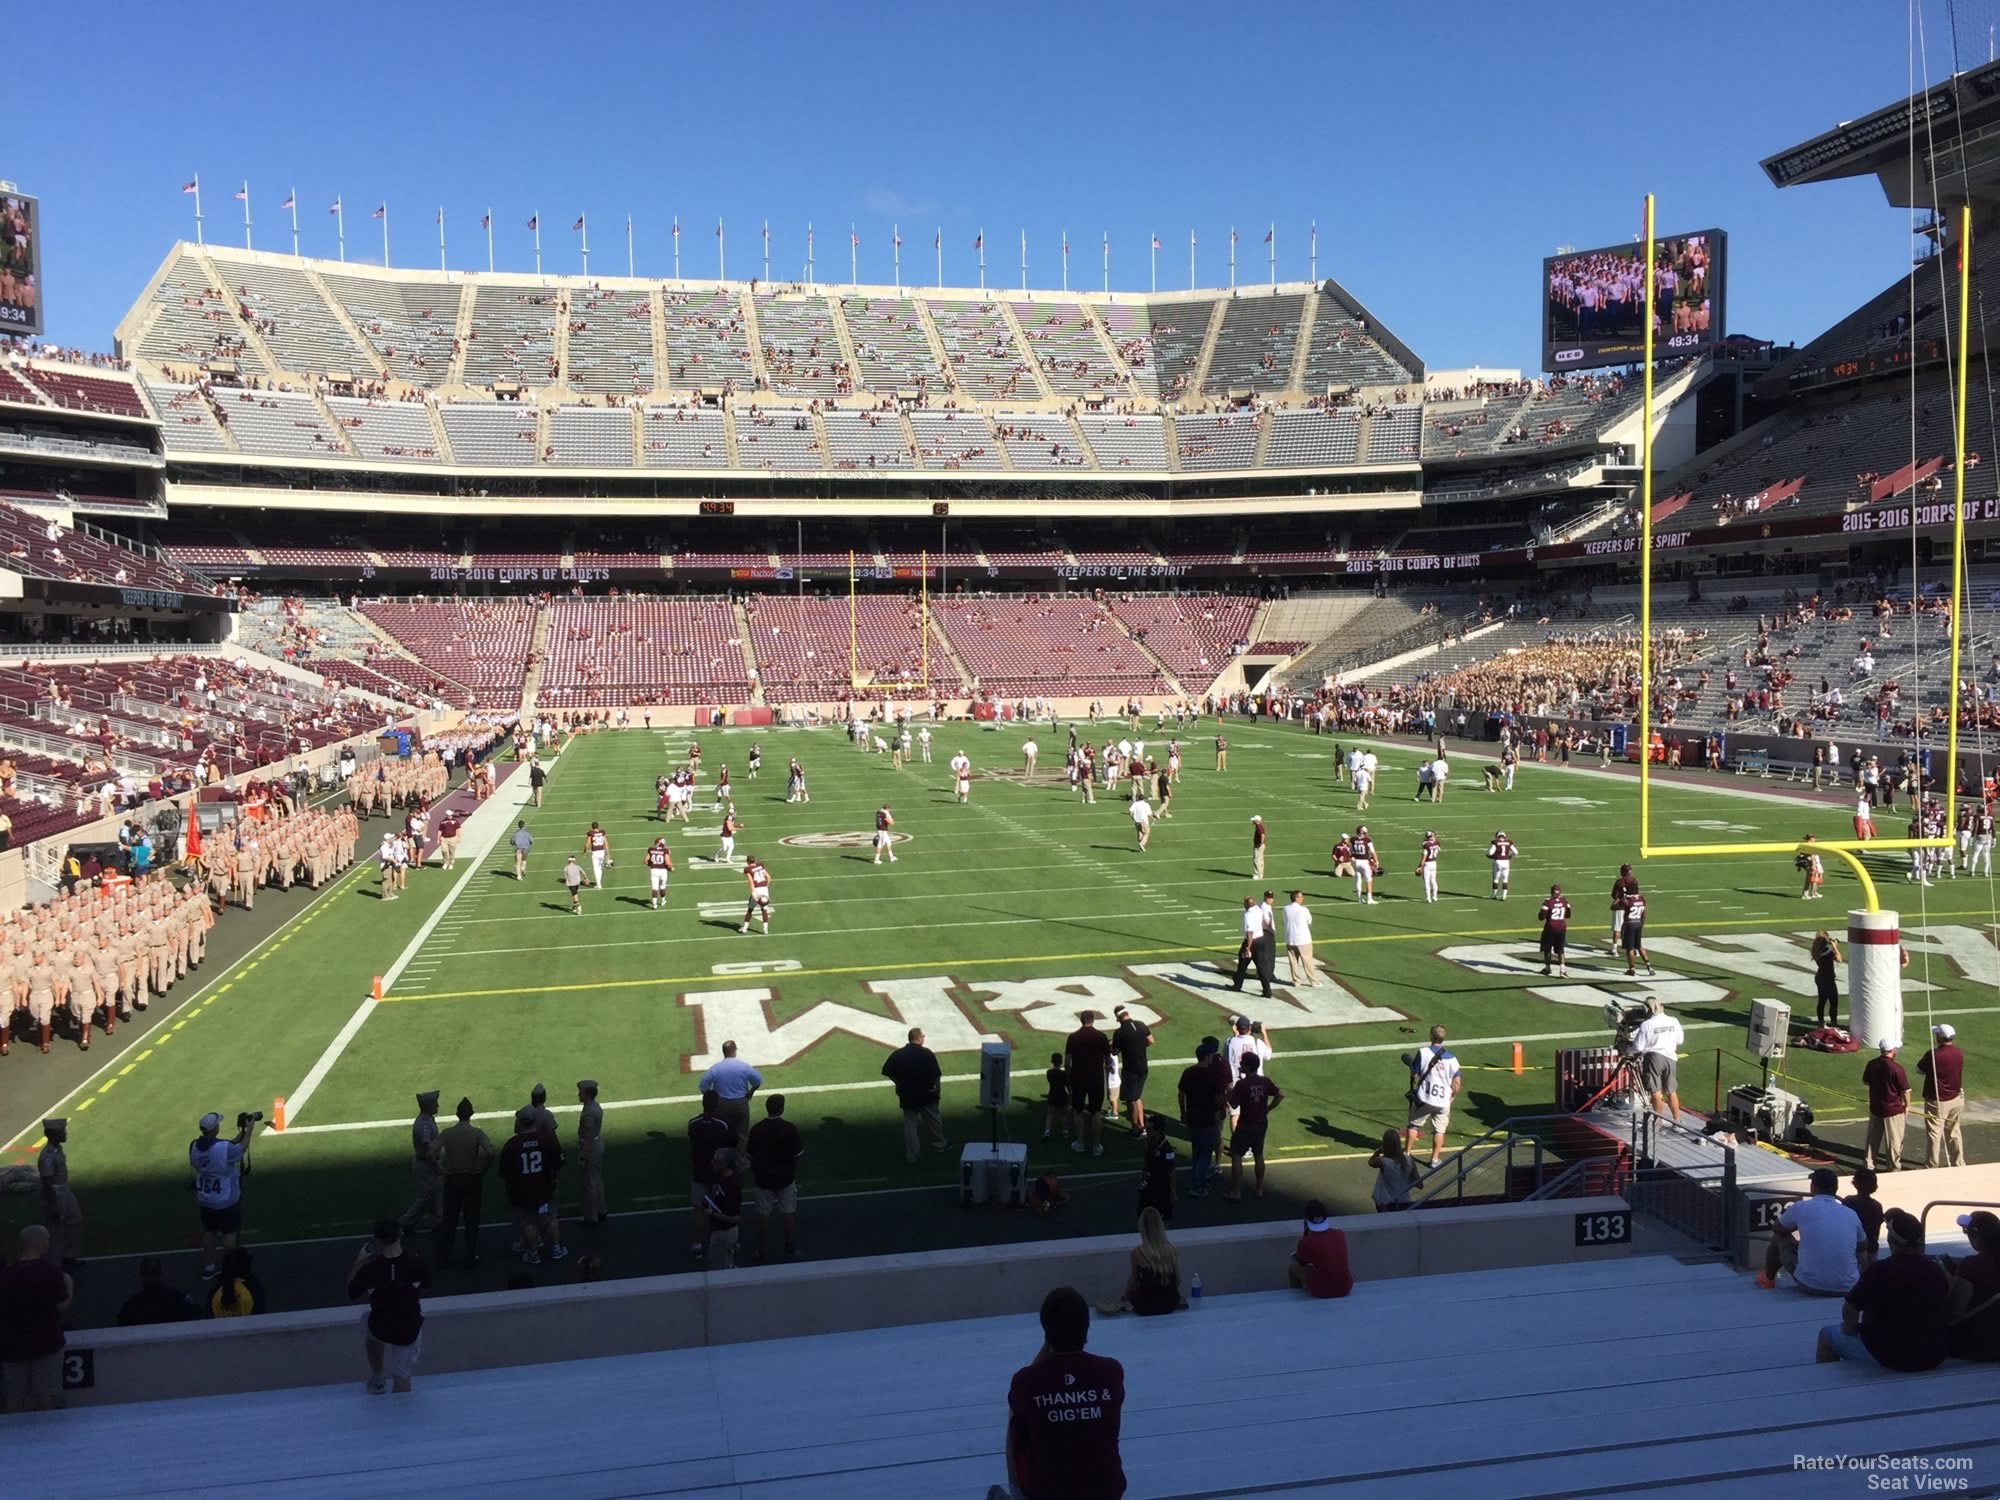 section 133, row 20 seat view  - kyle field